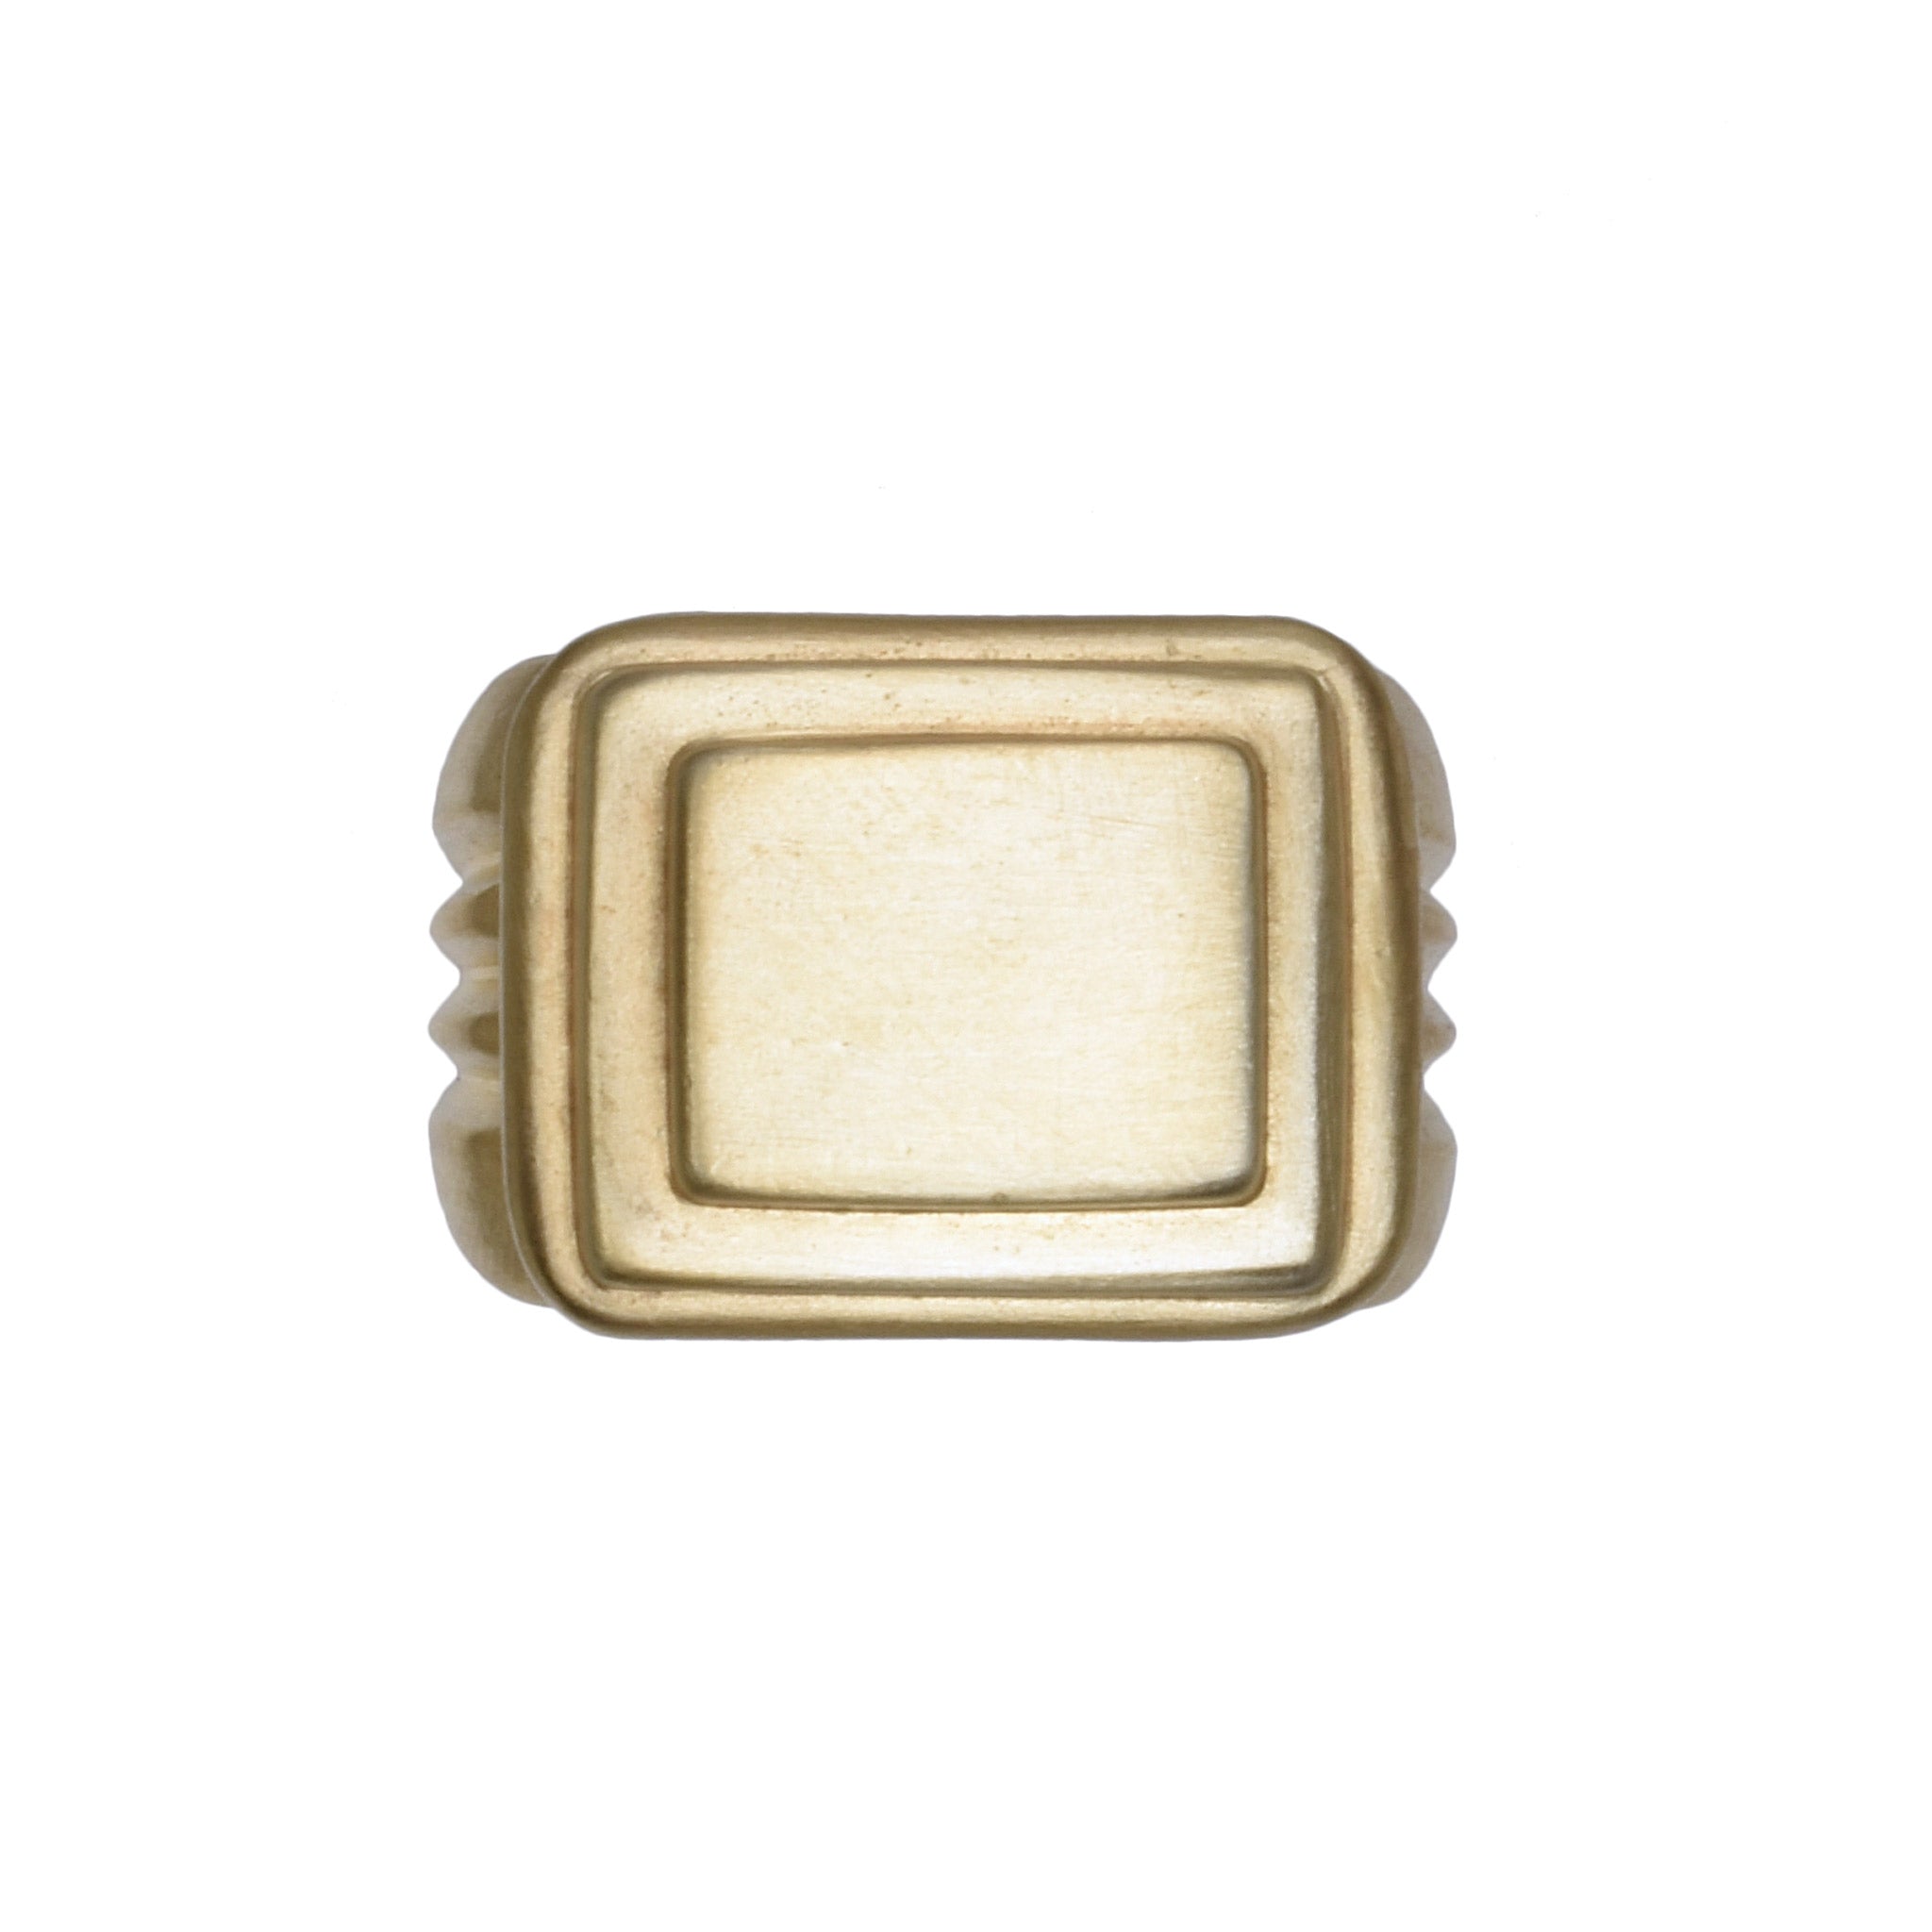 The signet ring